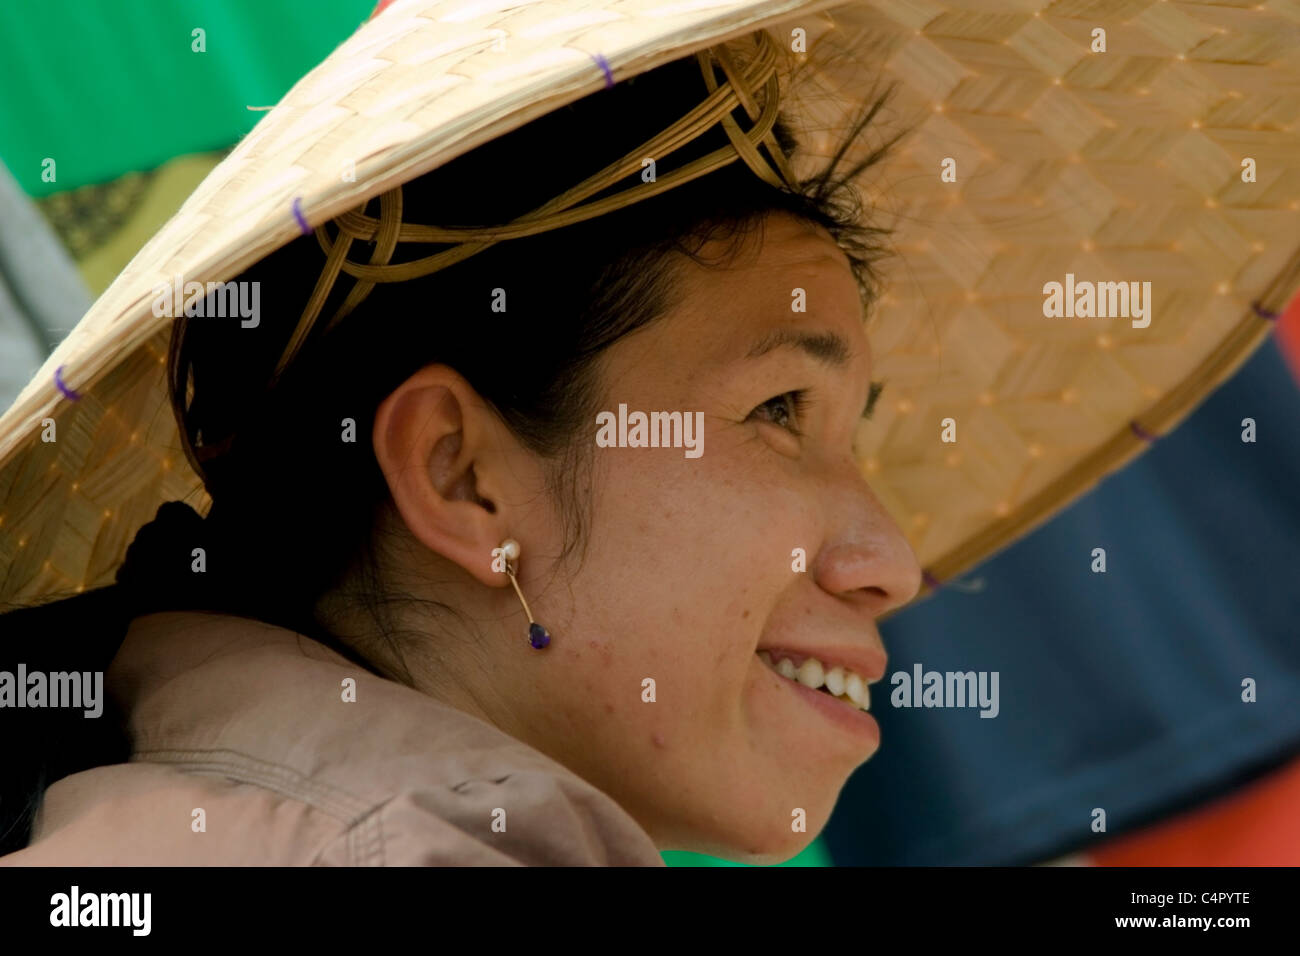 An Asian woman wearing a straw hat is selling goods at a street market in Luang Prabang, Laos. Stock Photo